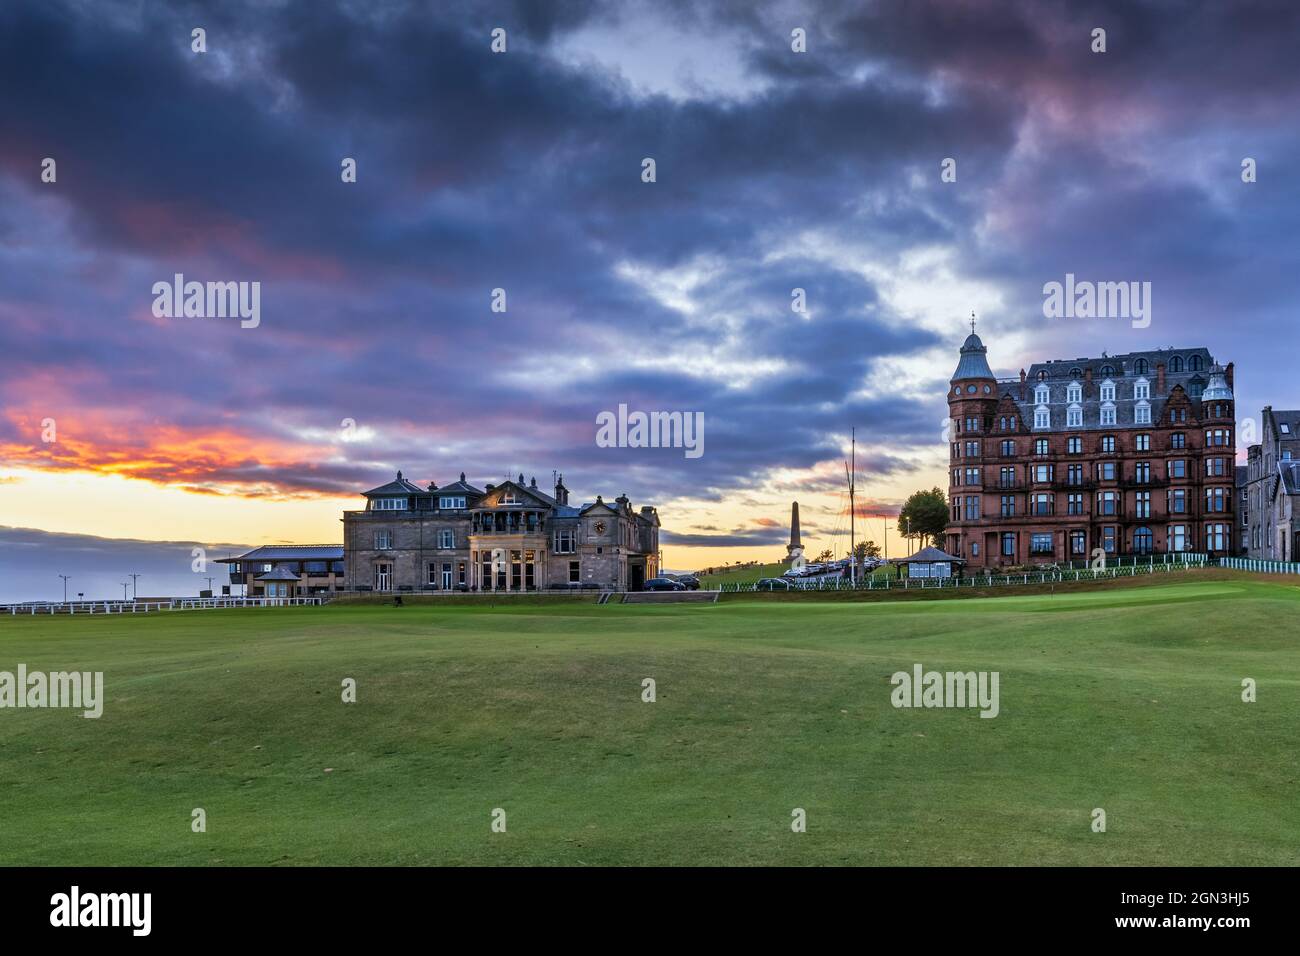 The 18th hole at the Old Course in St Andrews, Fife. The Royal and Ancient Golf Club clubhouse is on the left, and the Hamilton Grand on the left. Stock Photo